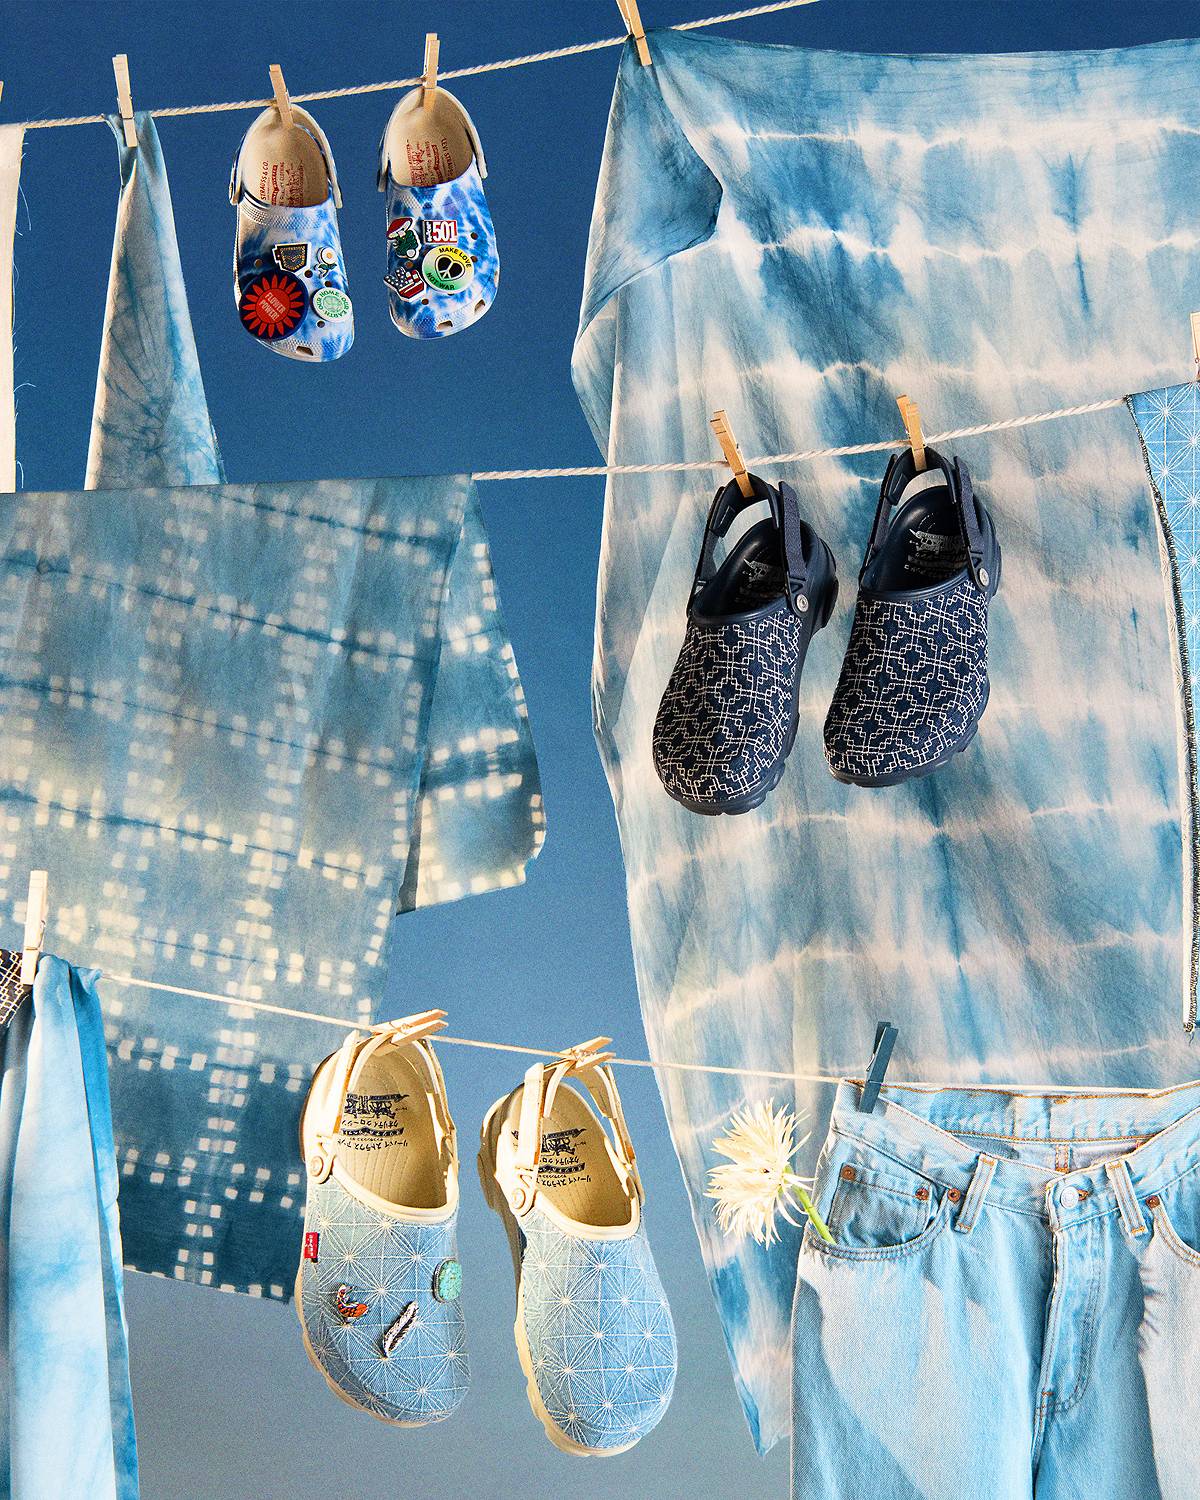 Three pairs of the Levi's® x Crocs collaboration hanging on a clothesline with pieces of dyed fabric hanging in the background.